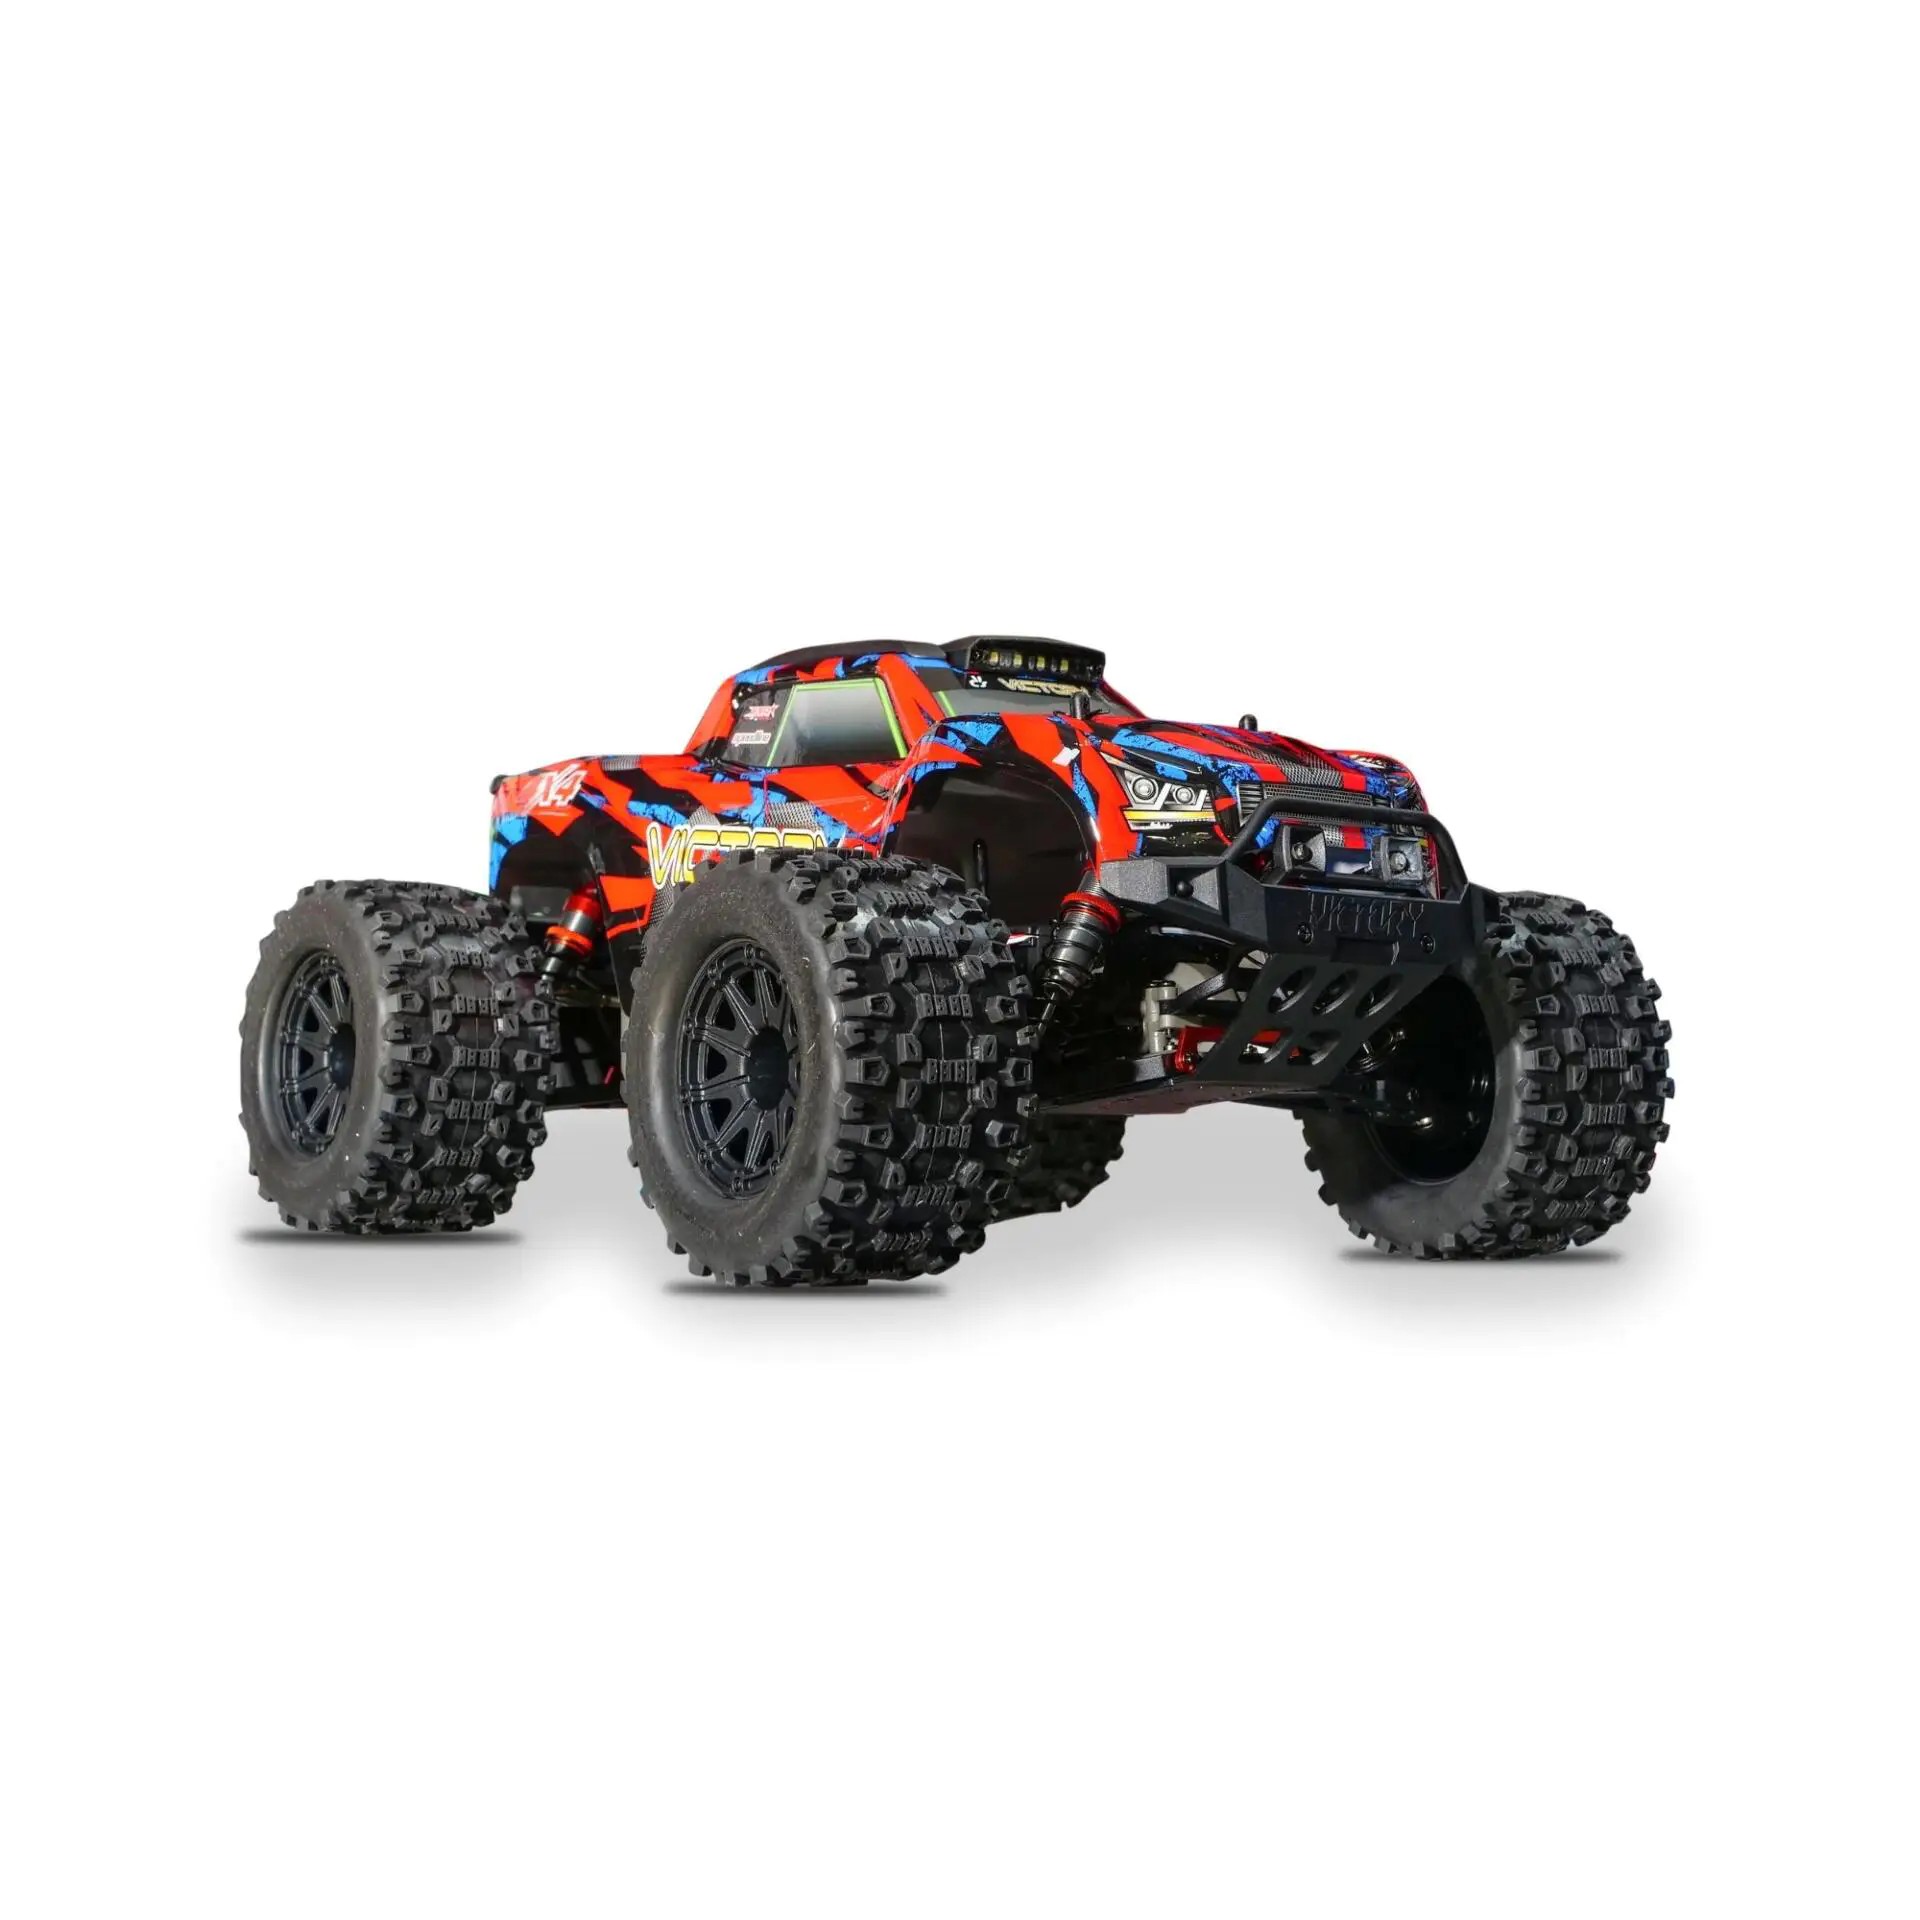 FS Racing Victory 3s 4WD 1/10 Brushless Rc Monster Truck